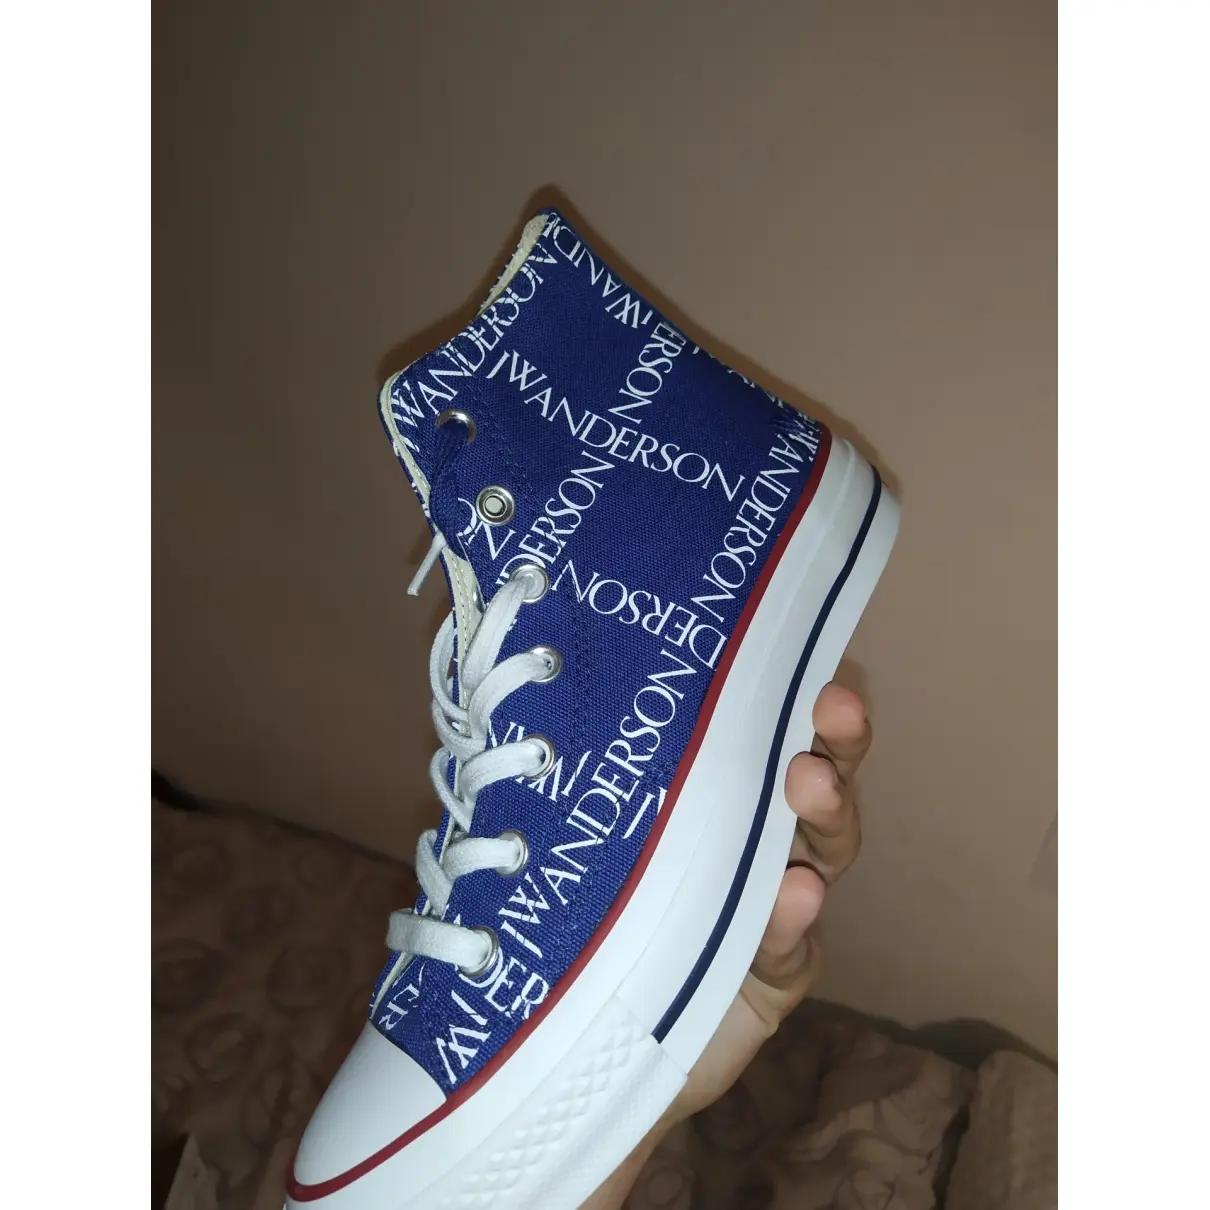 Converse x J.W Anderson Cloth trainers for sale